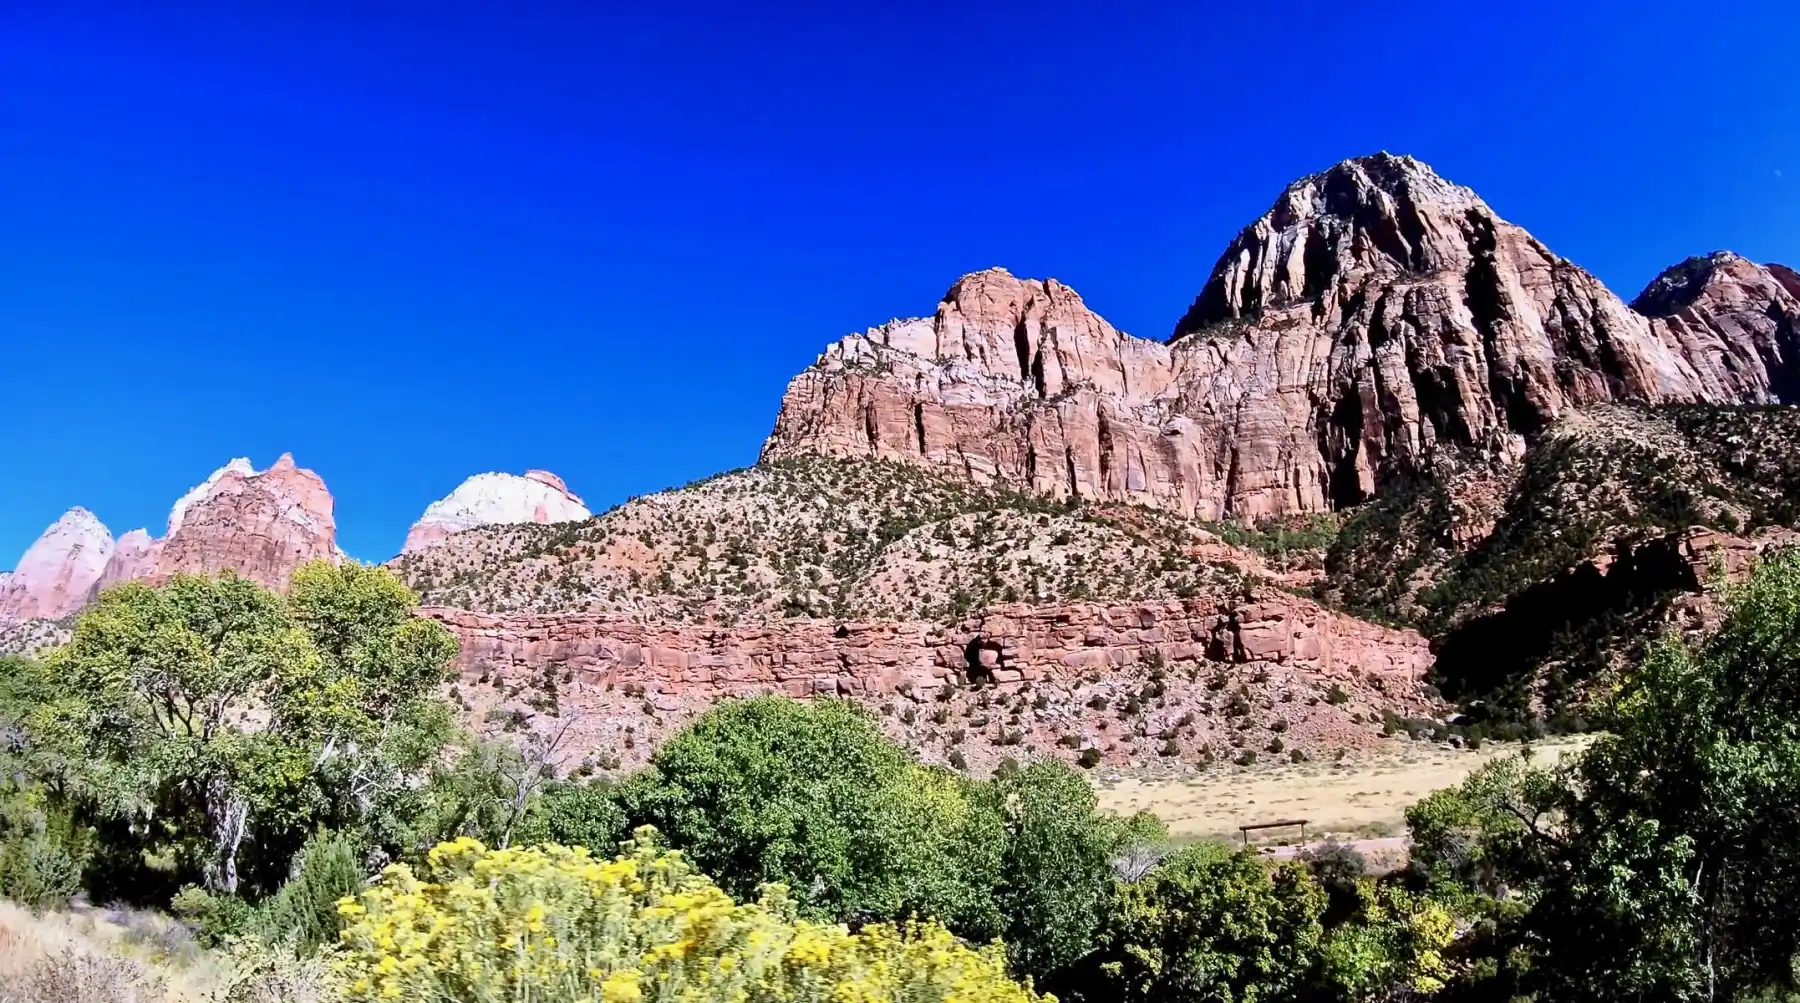 A spectacular view from the Zion - Mount Carmel Highway drive